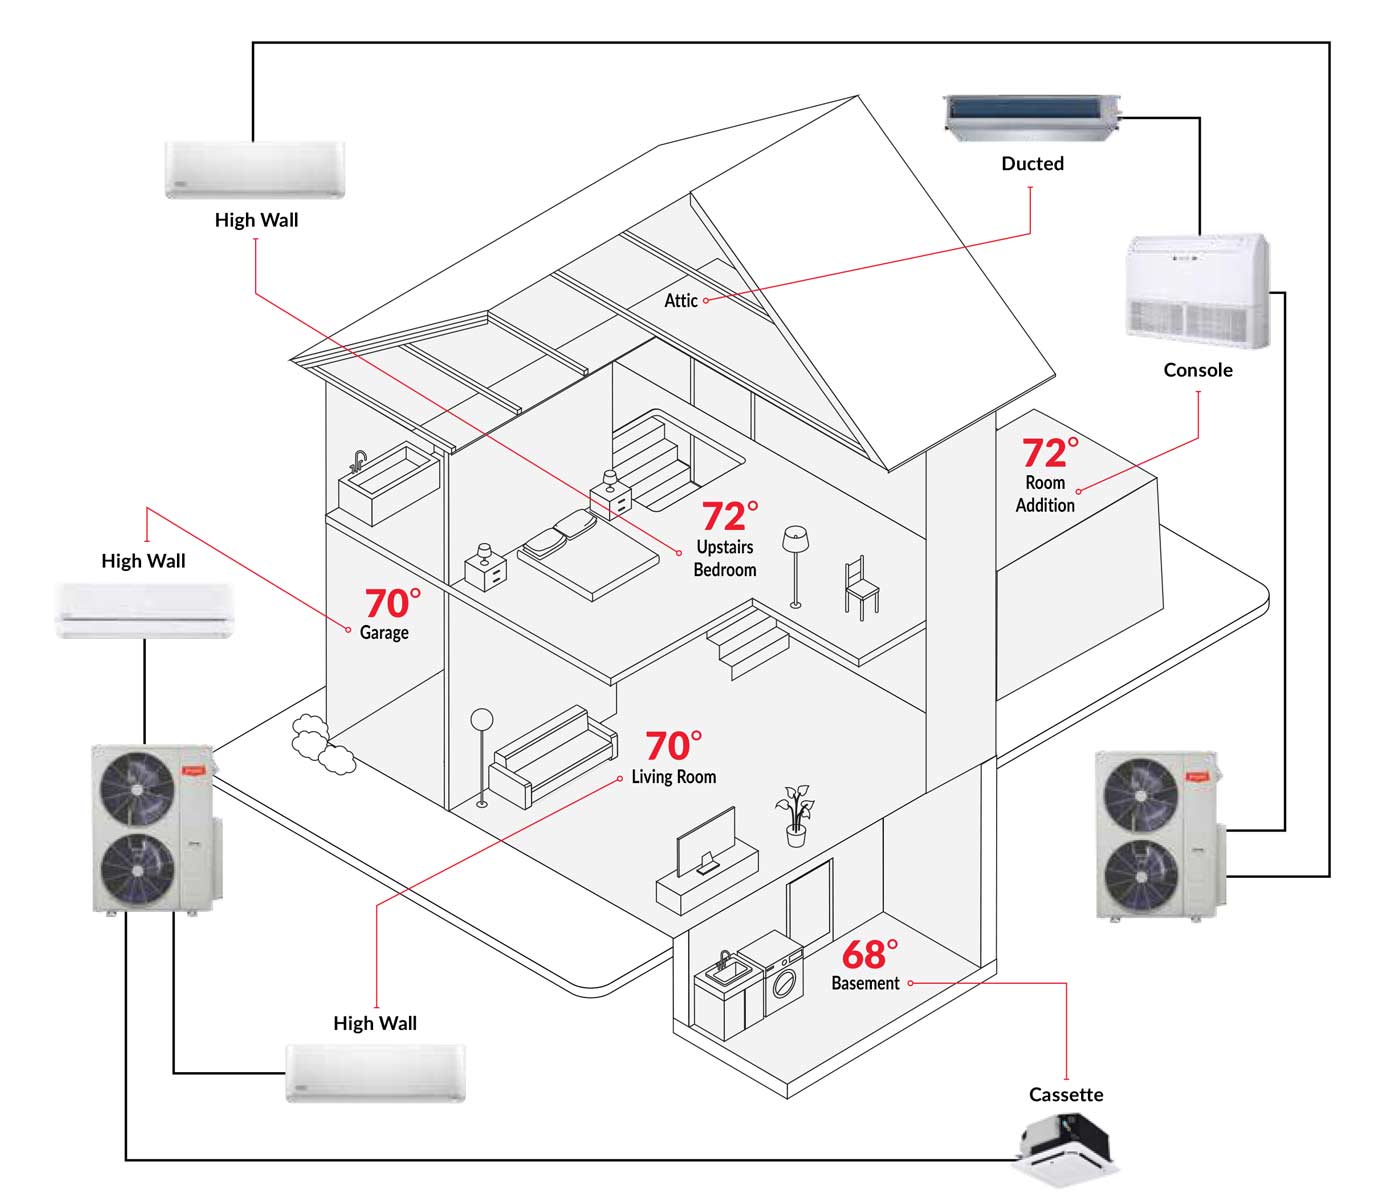 House diagram showing ductless installation